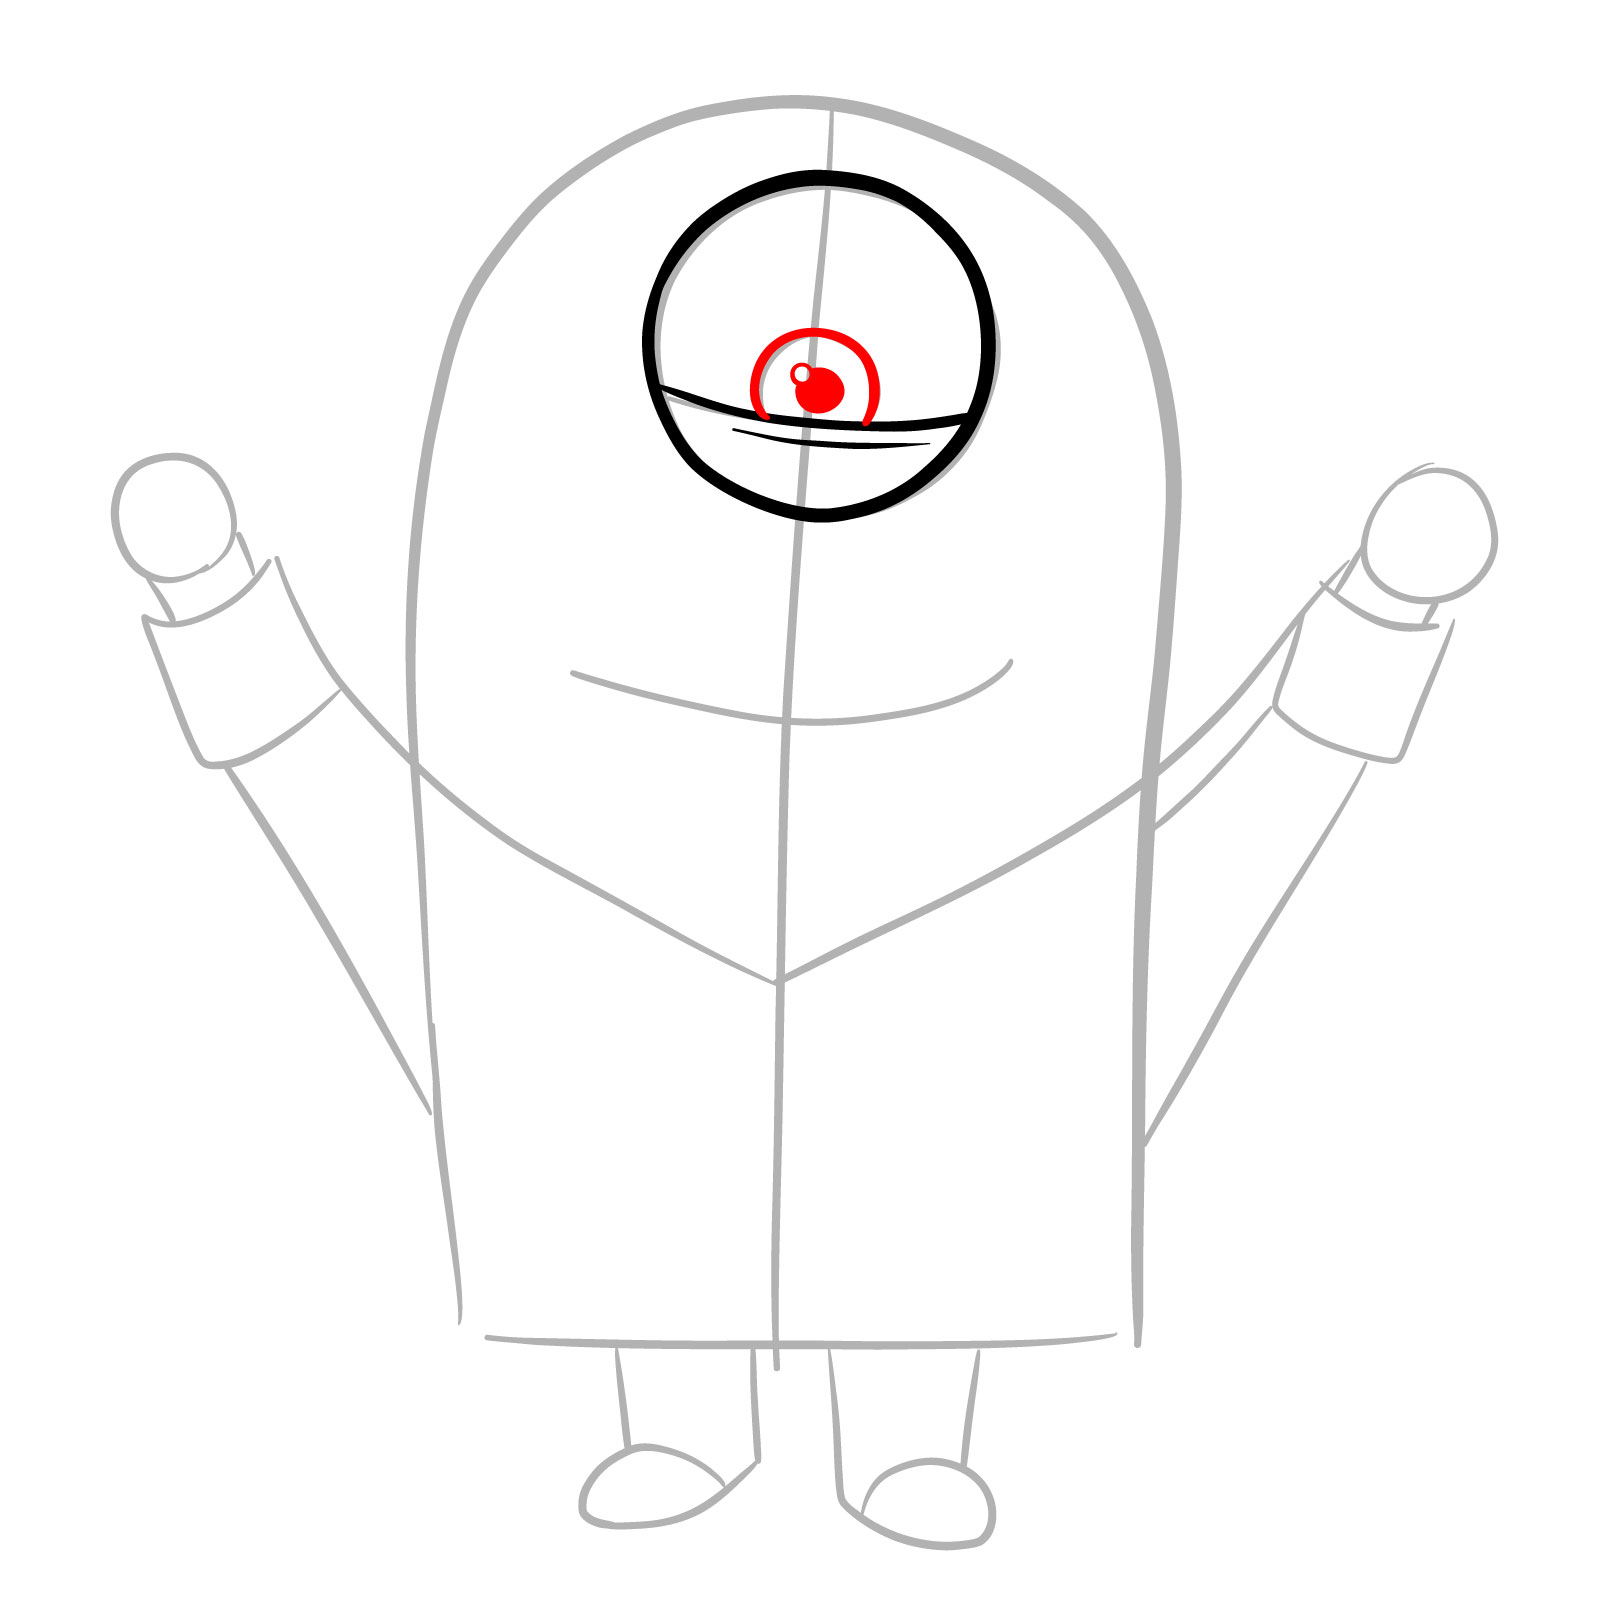 How to Draw a Vampire Minion - step 06